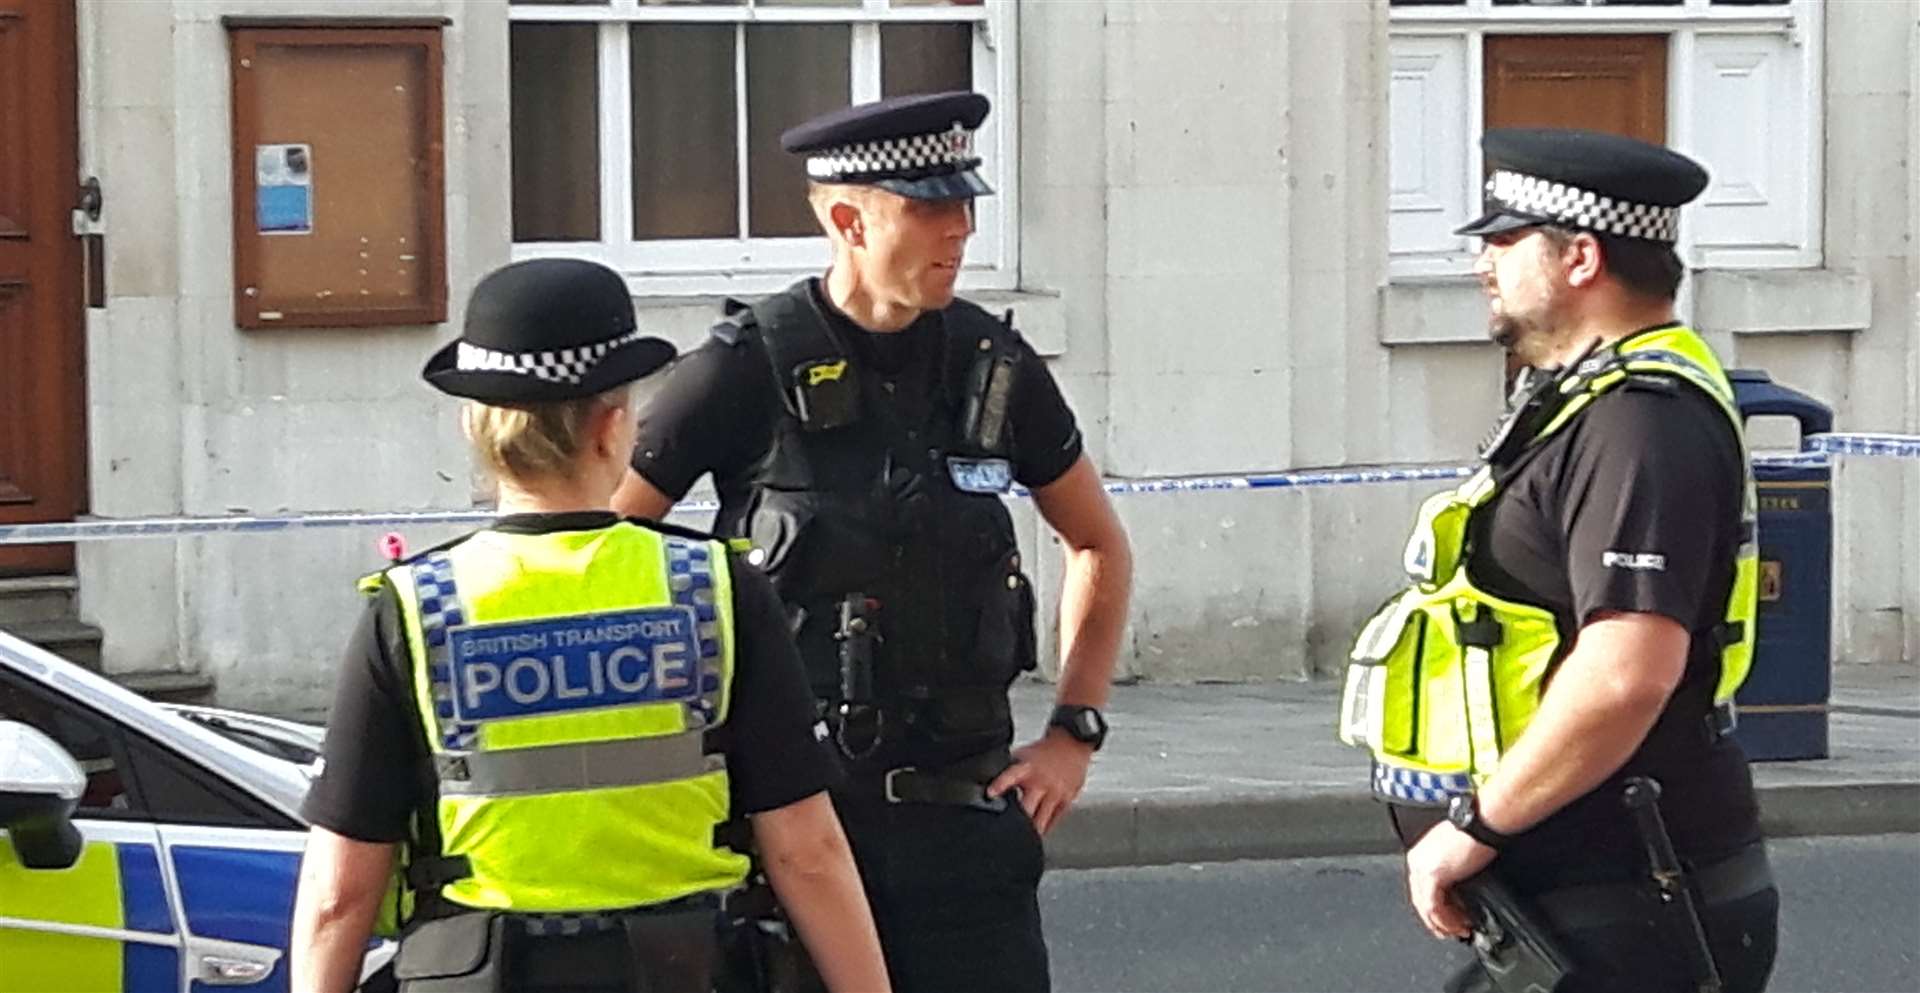 Levels of crime in Maidstone have significantly dropped